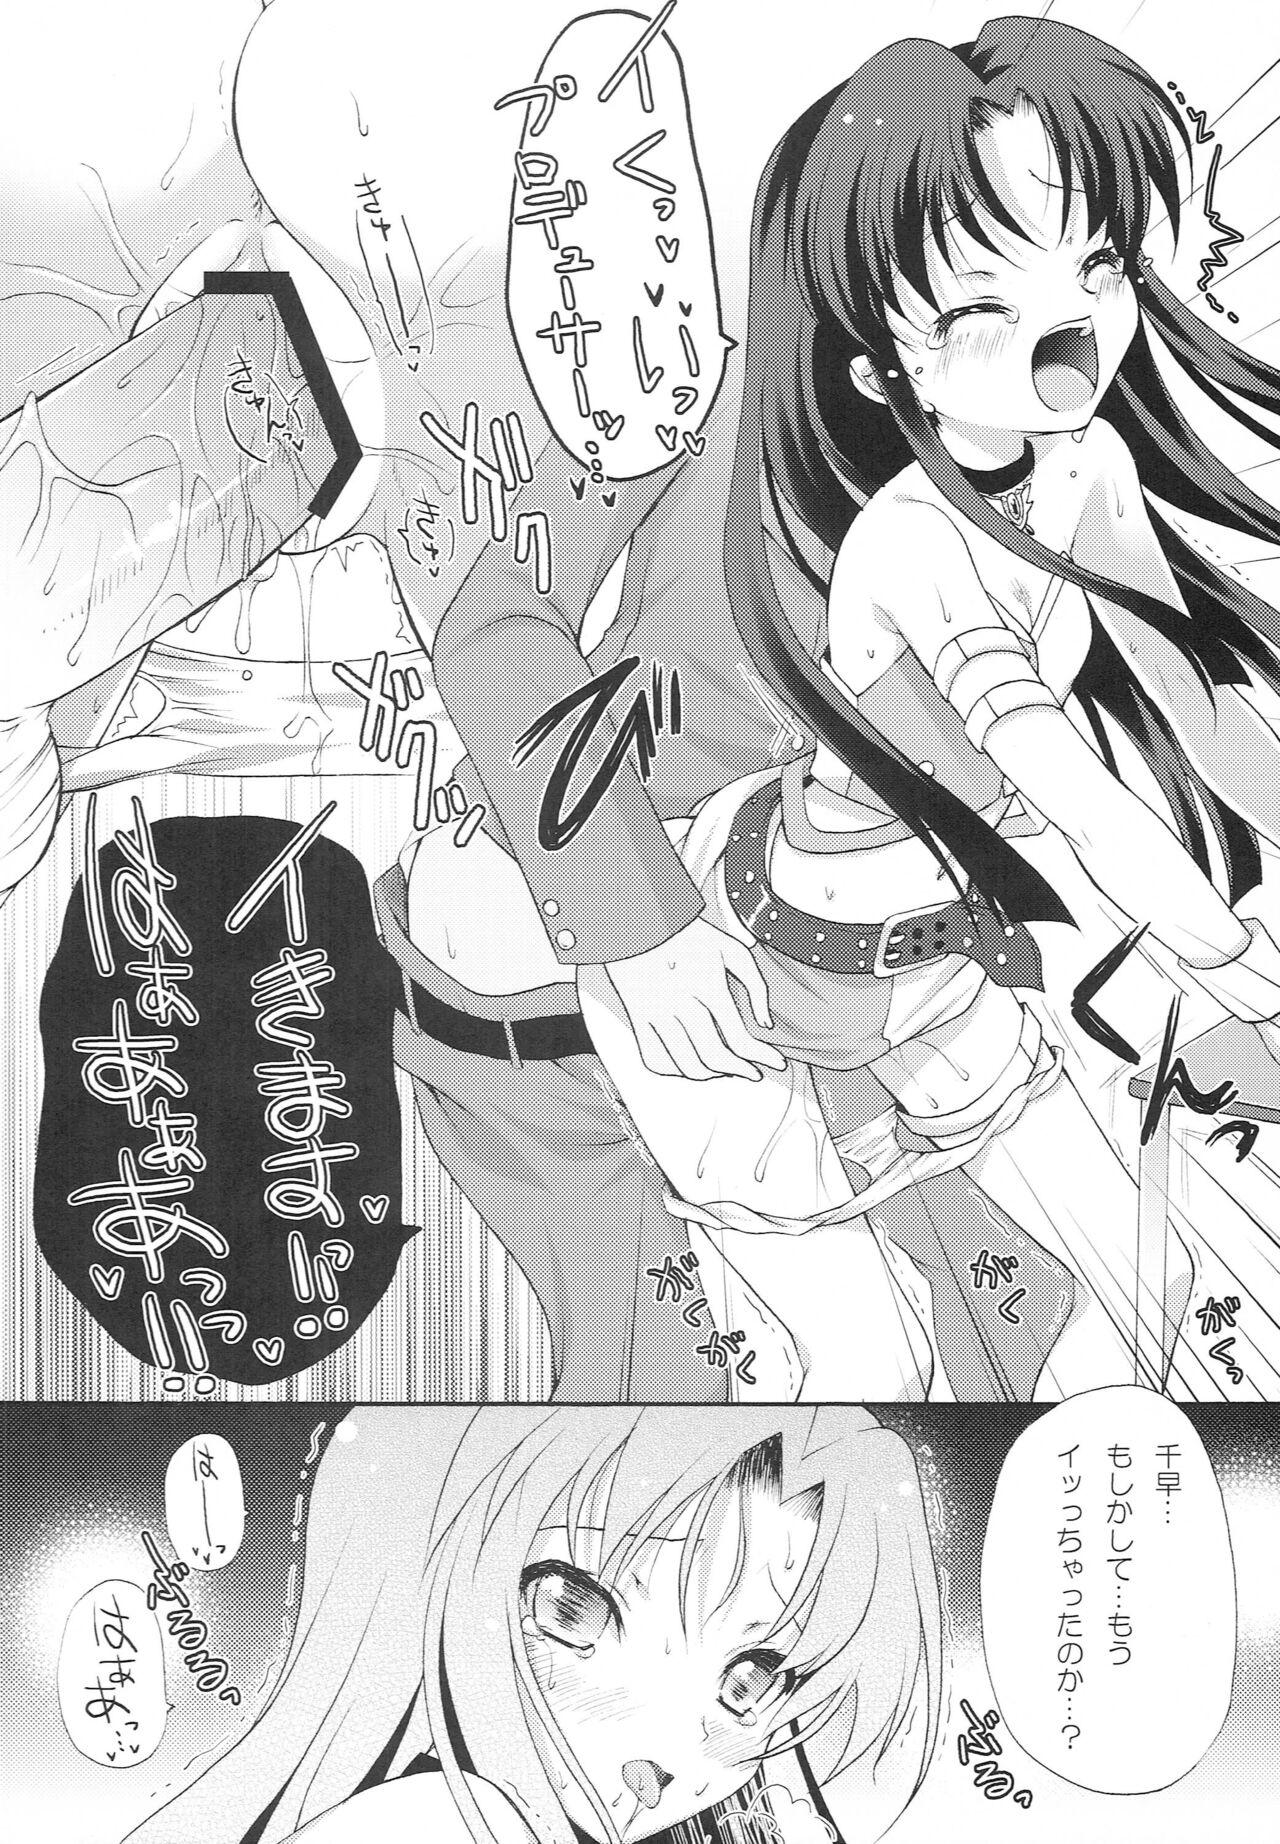 Mofos 1000th ENCORE - The idolmaster Humiliation - Page 9